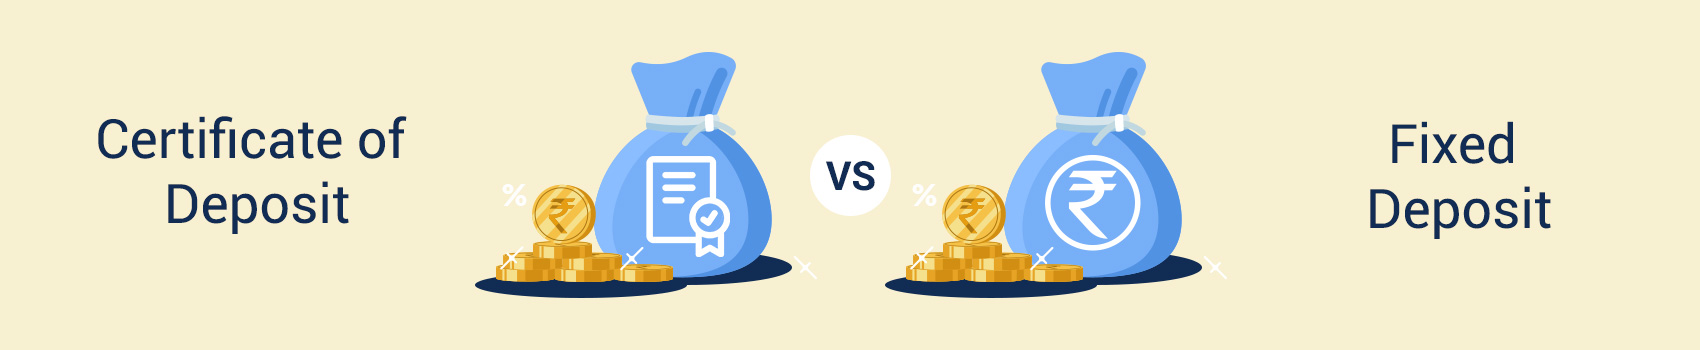 Certificate of Deposit vs Fixed Deposit: Full Form Difference